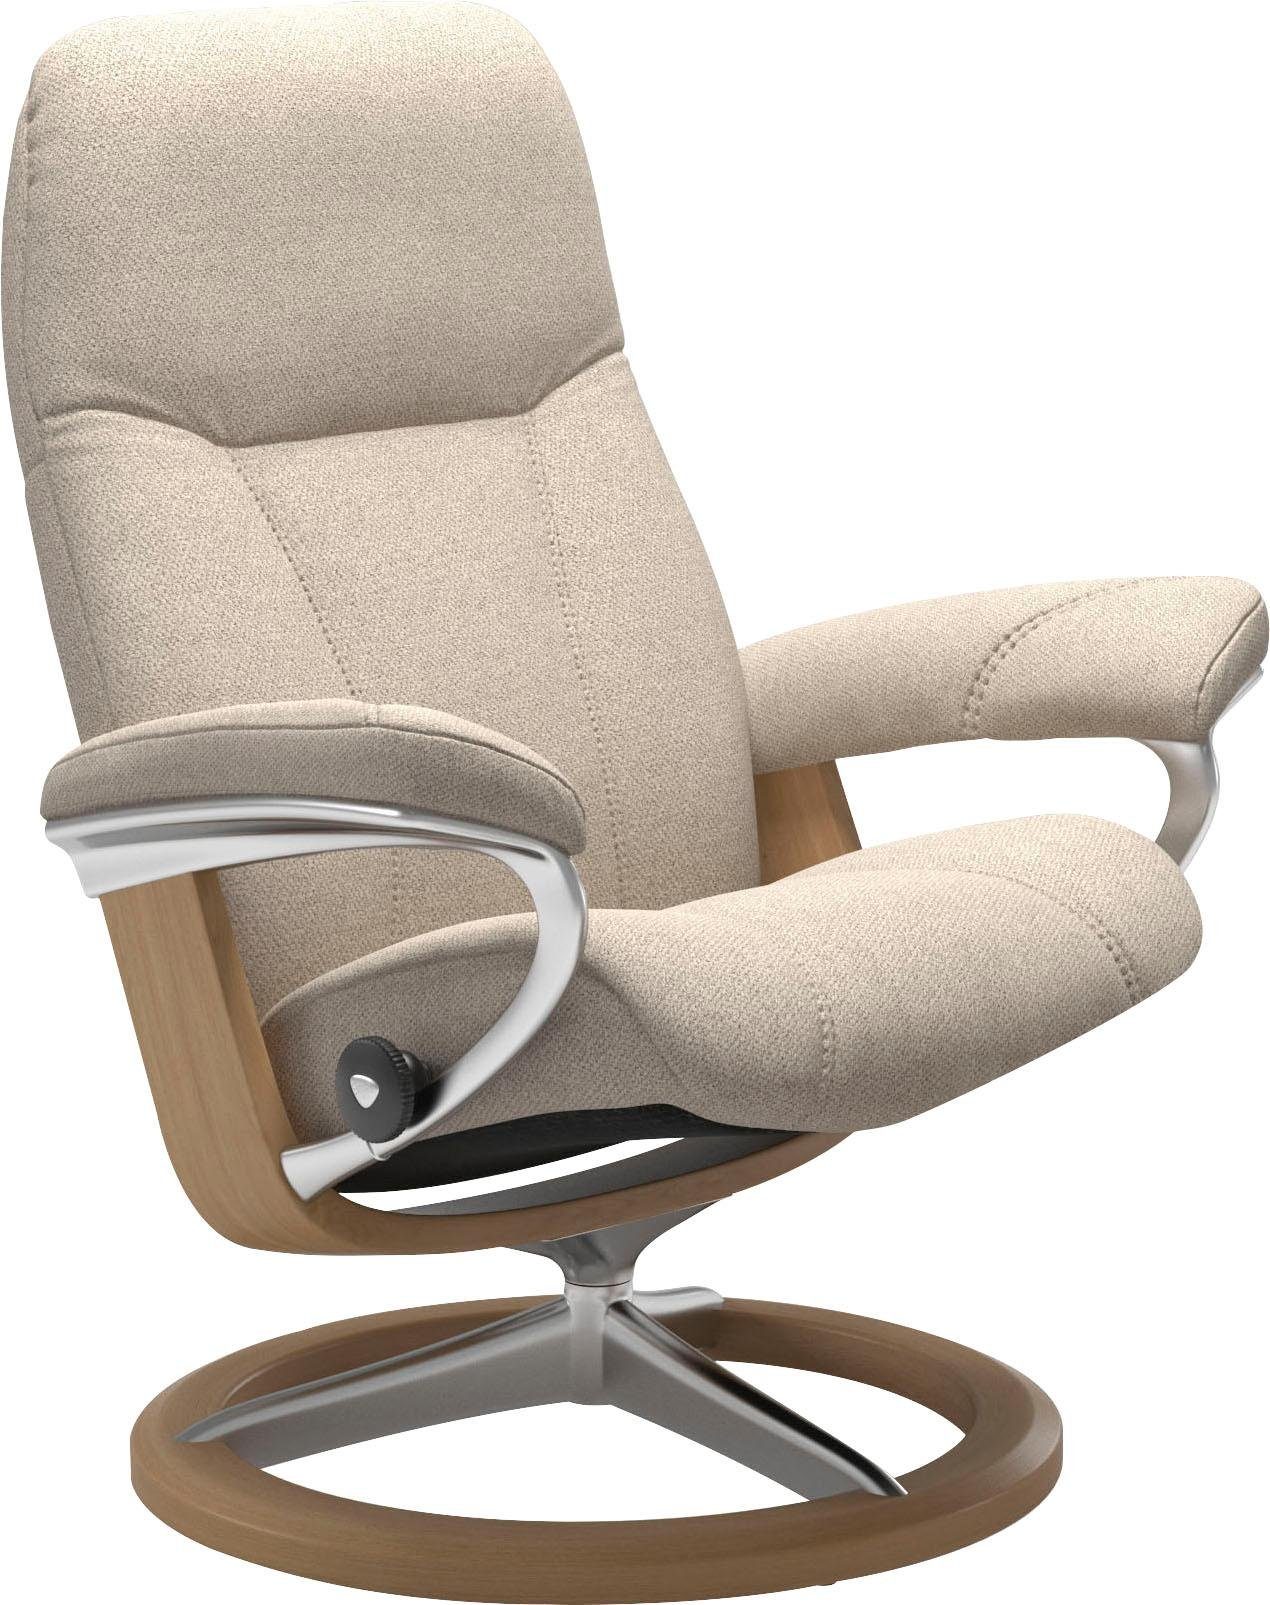 Stressless® Relaxsessel Consul, mit Signature Base, Größe L, Gestell Eiche | Funktionssessel